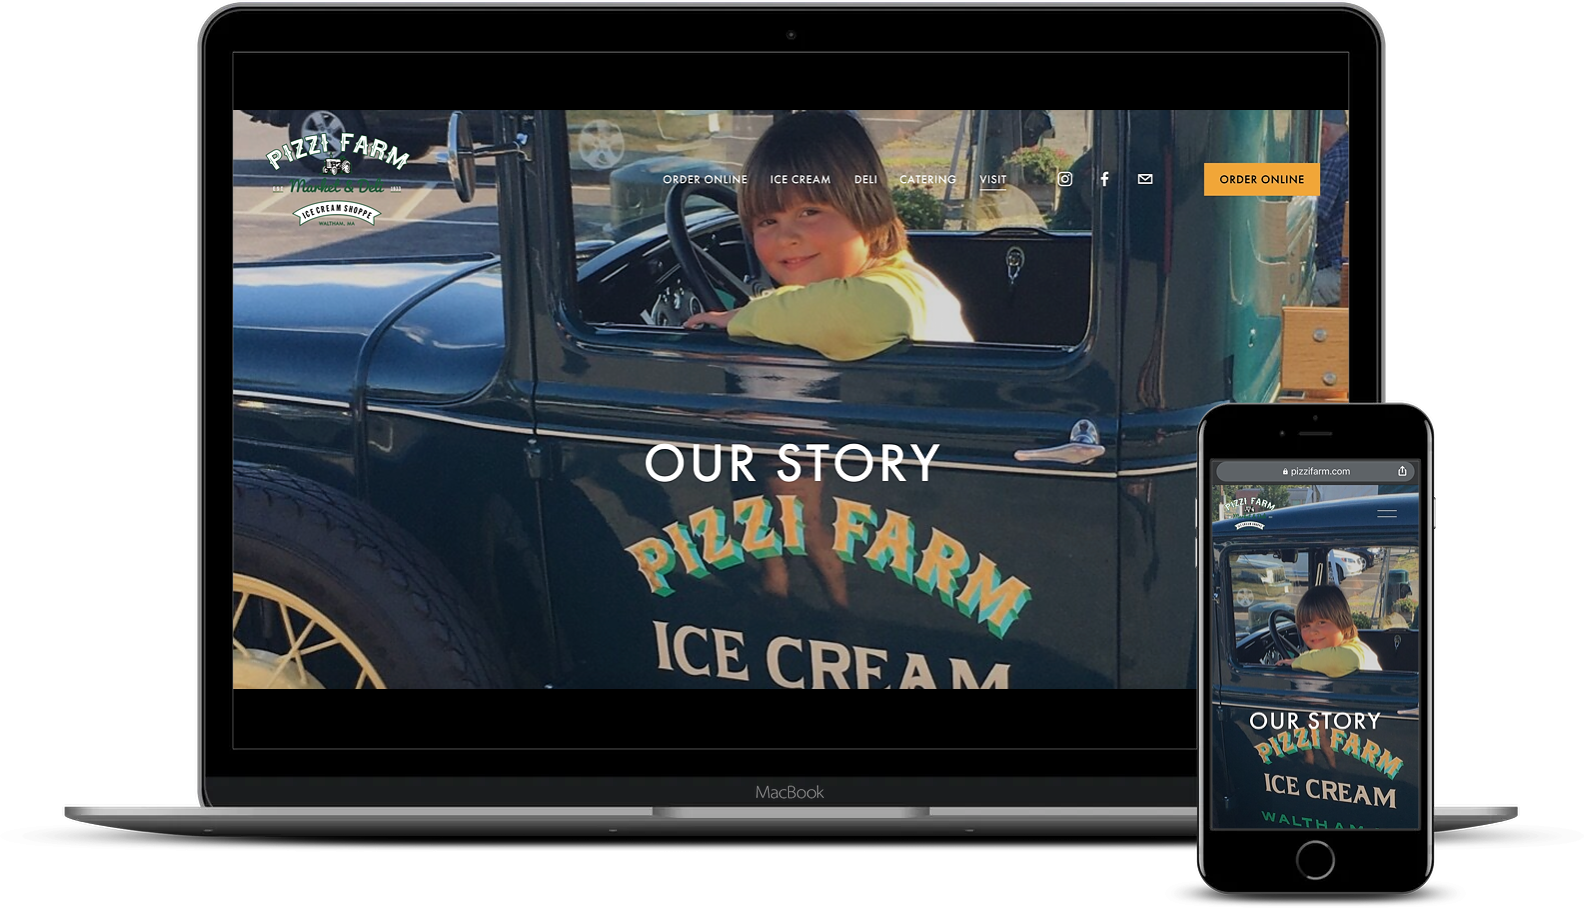 Pizzi Farm Waltham MA Grey Barn Media squarespace website small business deli our story after.png